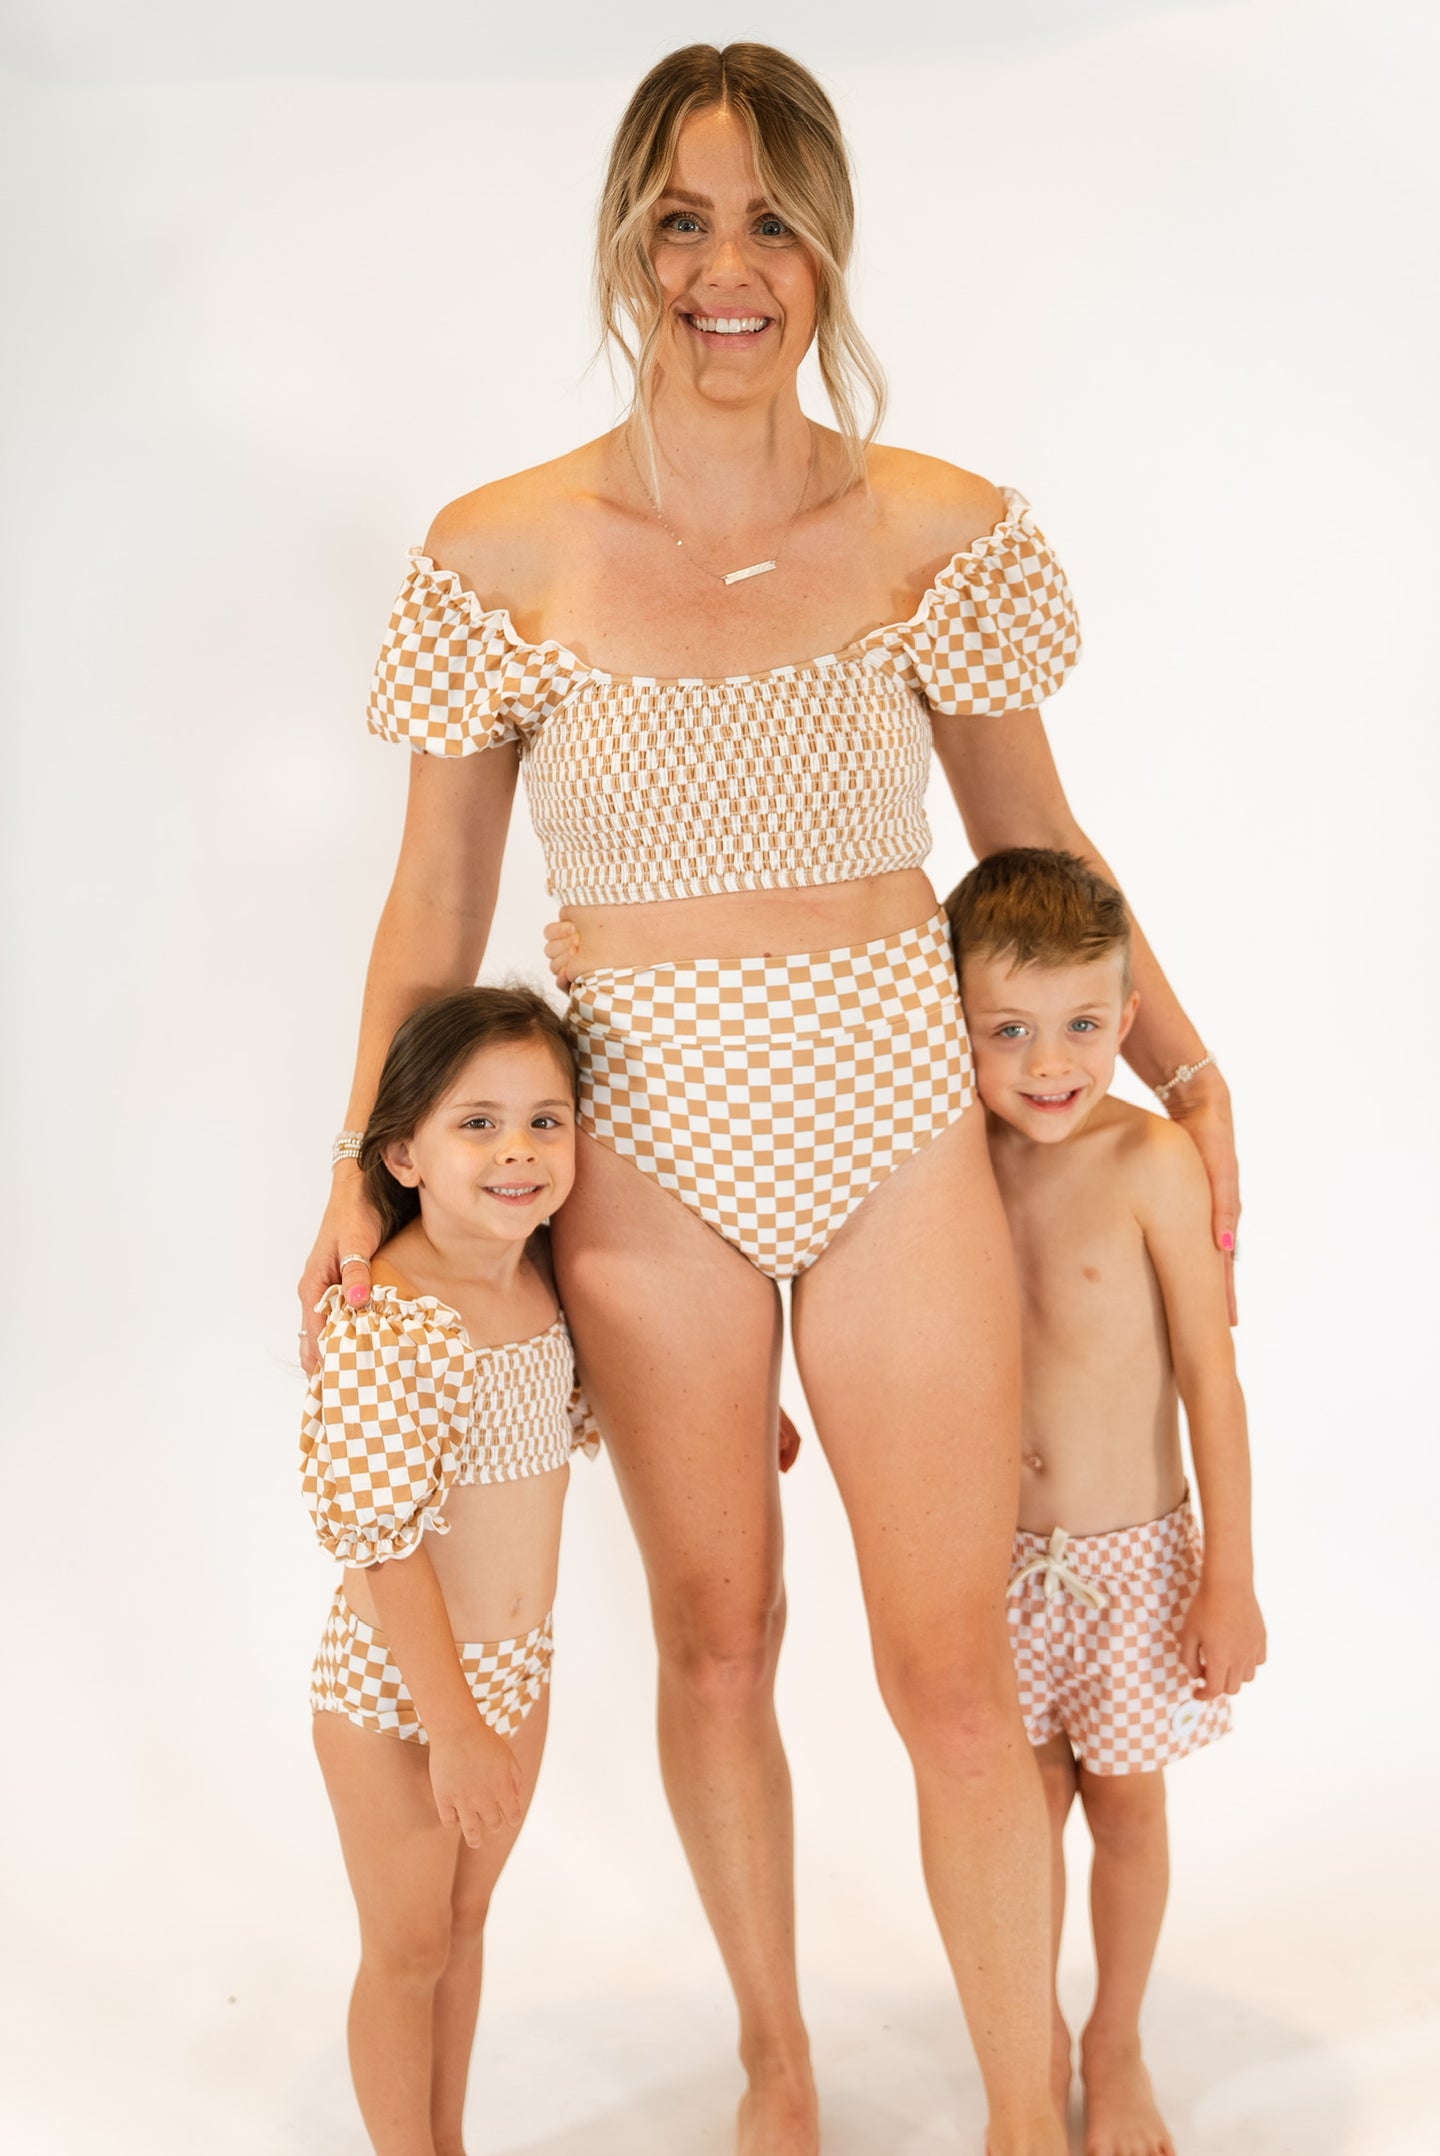 Mommy and Me Swimsuit, Matching Swimwear, Two Piece Bathing Suits